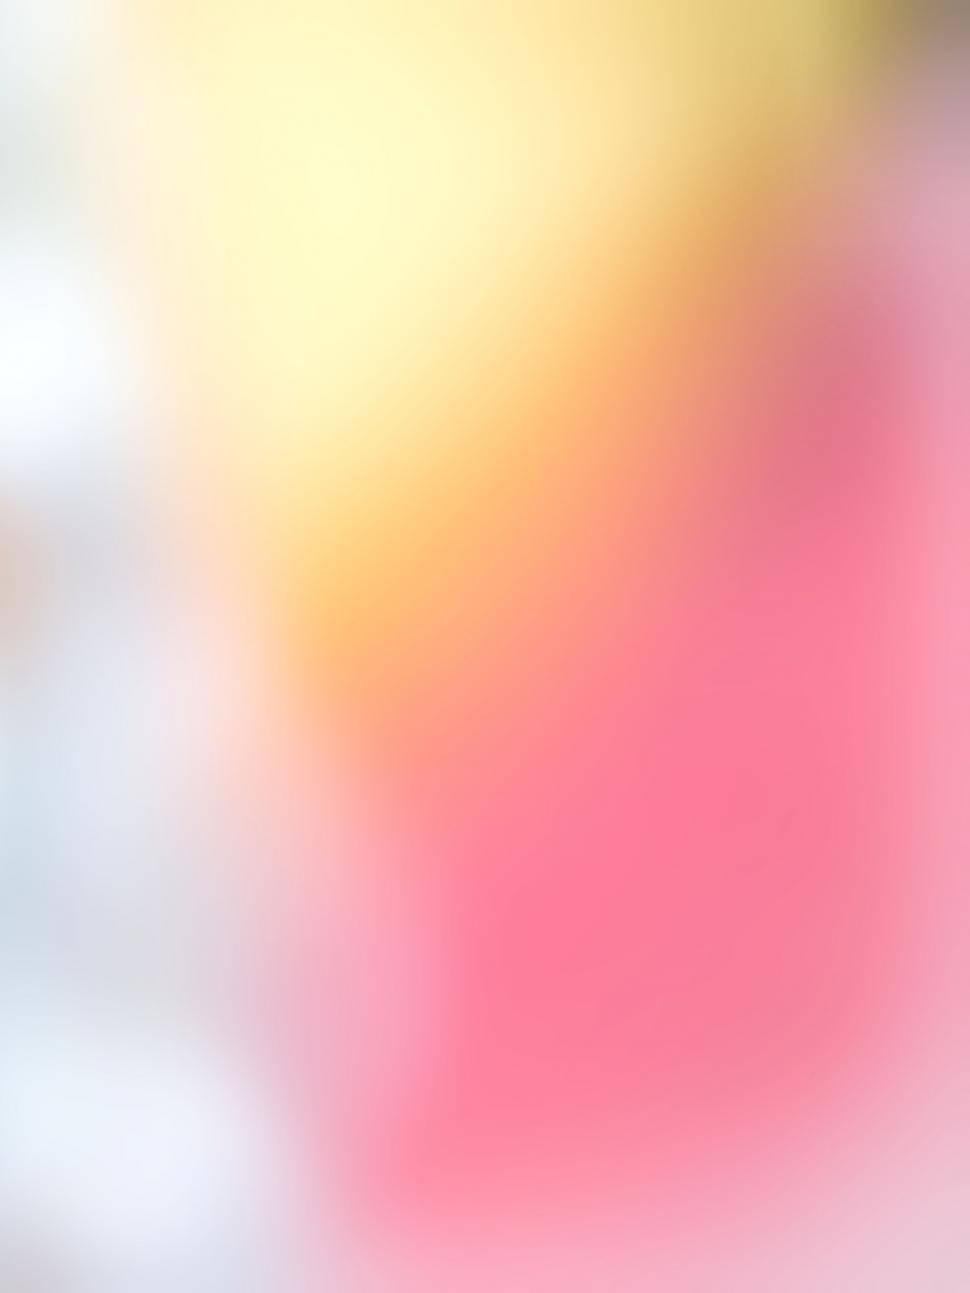 Free Image of Blurred abstract gradient background in pink 